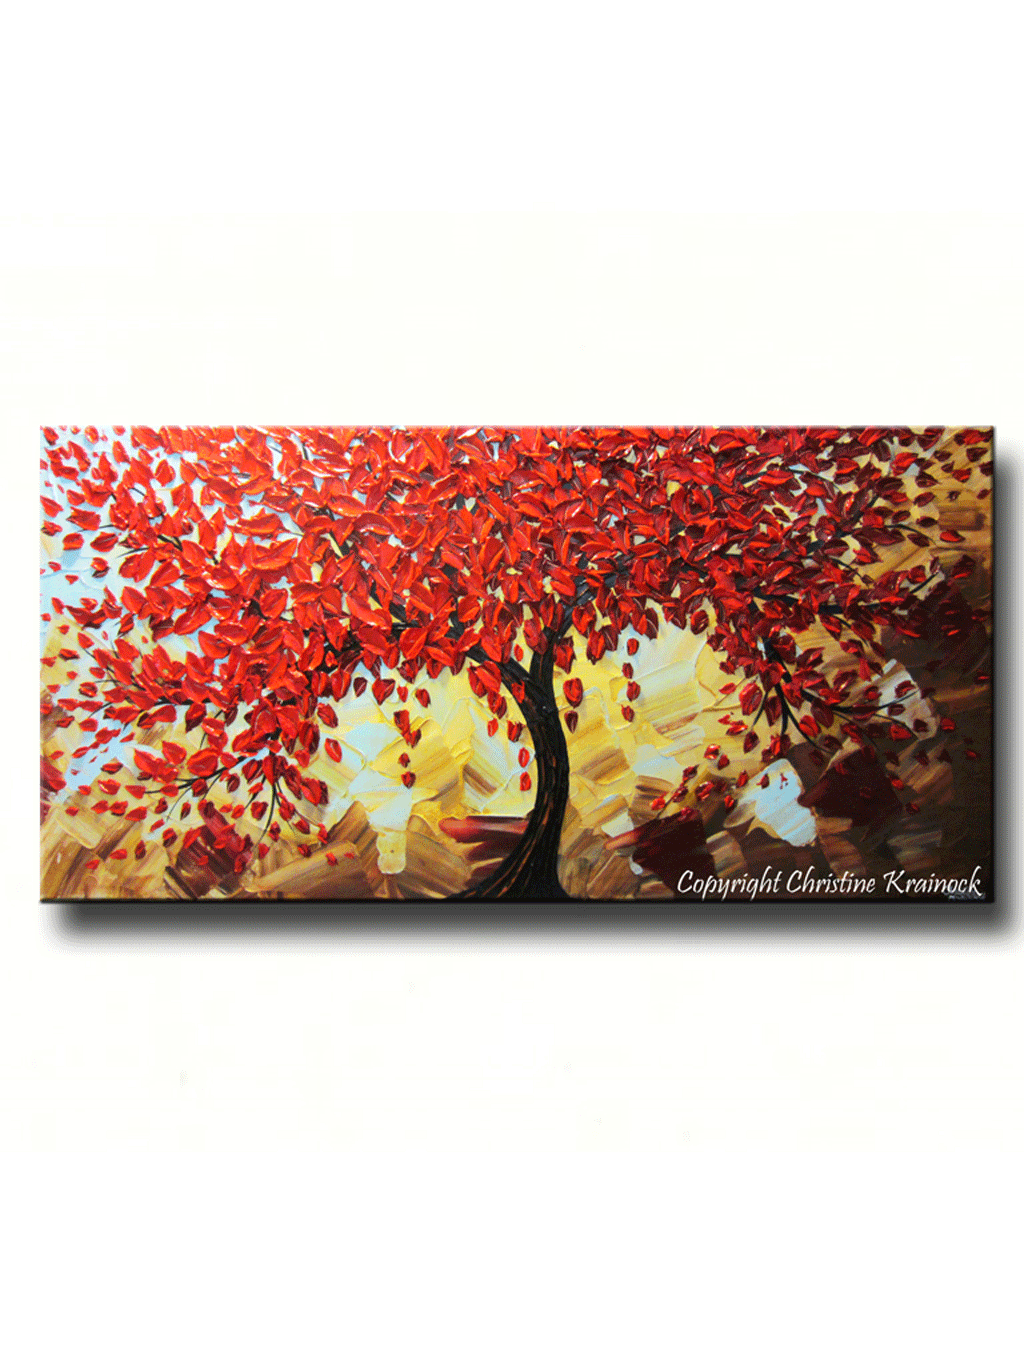 Custom Original Art Abstract Painting Red Tree Of Life Modern Textured Contemporary Art By Christine